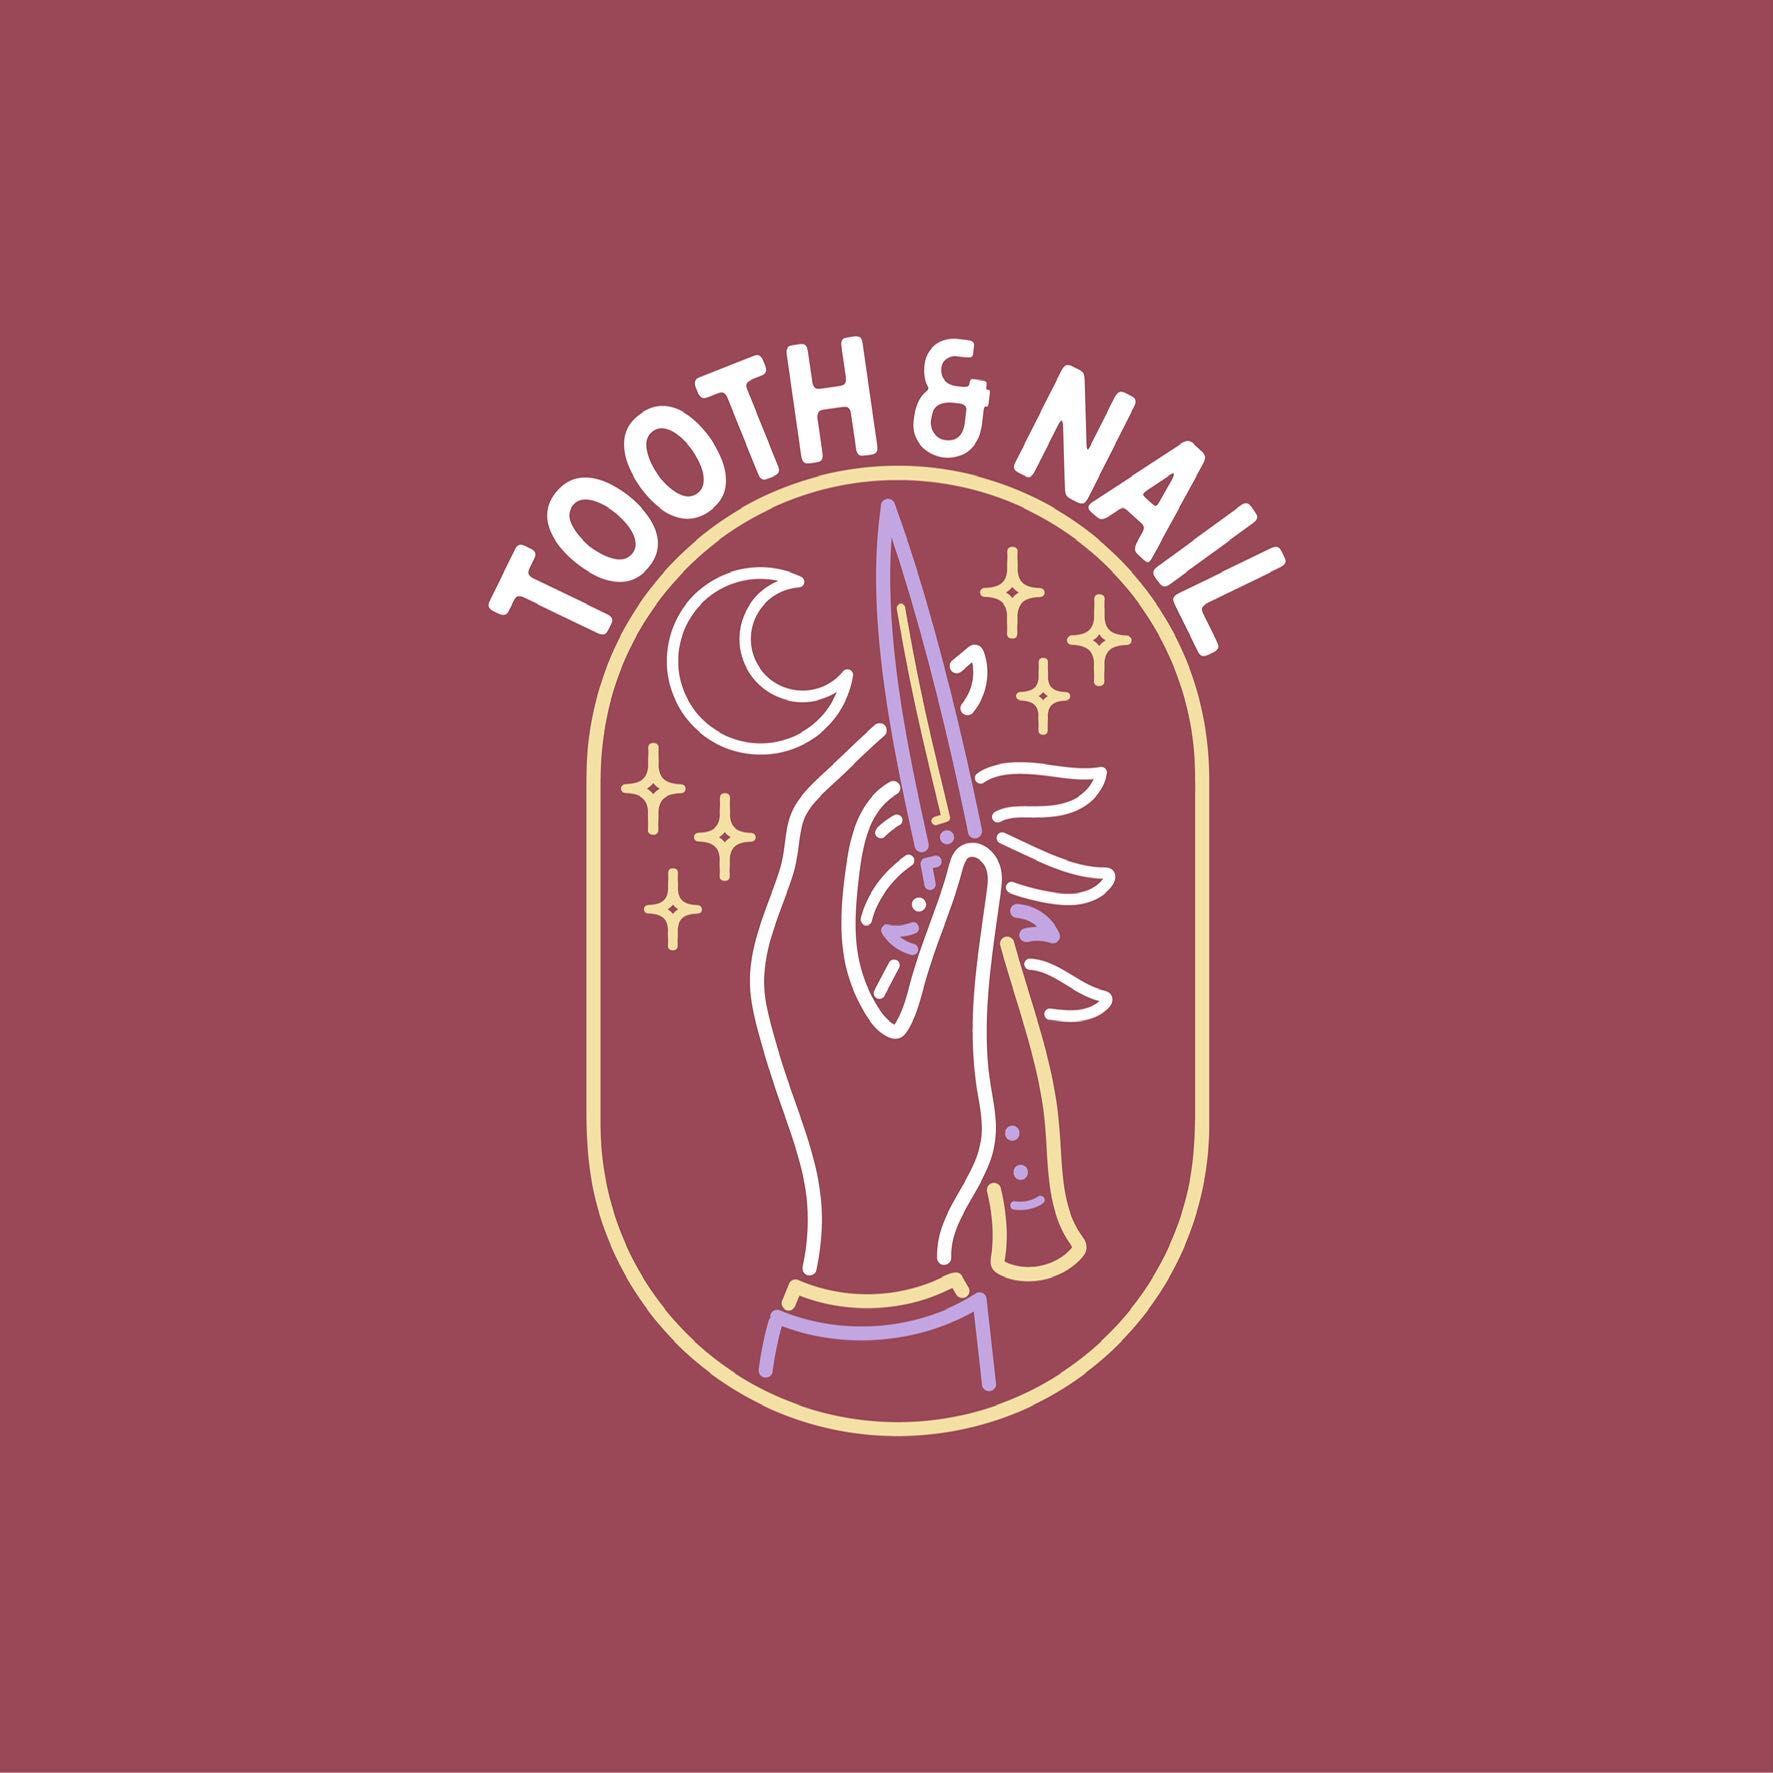 Tooth & Nail Studio, 1757 n Kimball Ave, Chicago, 60647